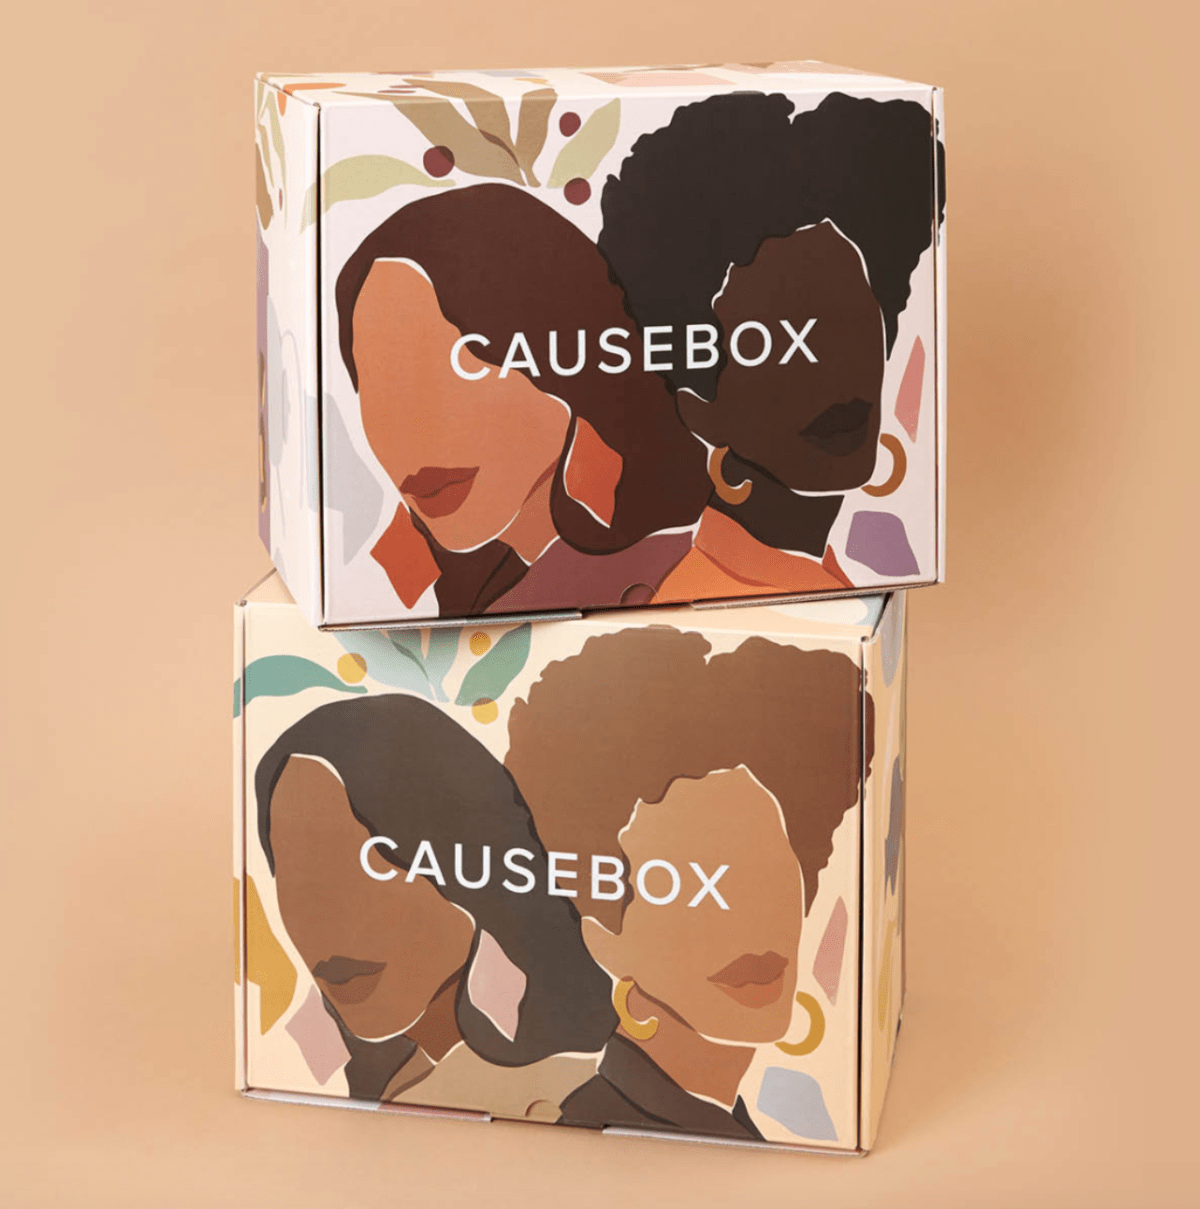 Read more about the article CAUSEBOX Cyber Monday Sale – Get Your First Box for $29.95 or First Box FREE with Annual Subscription.